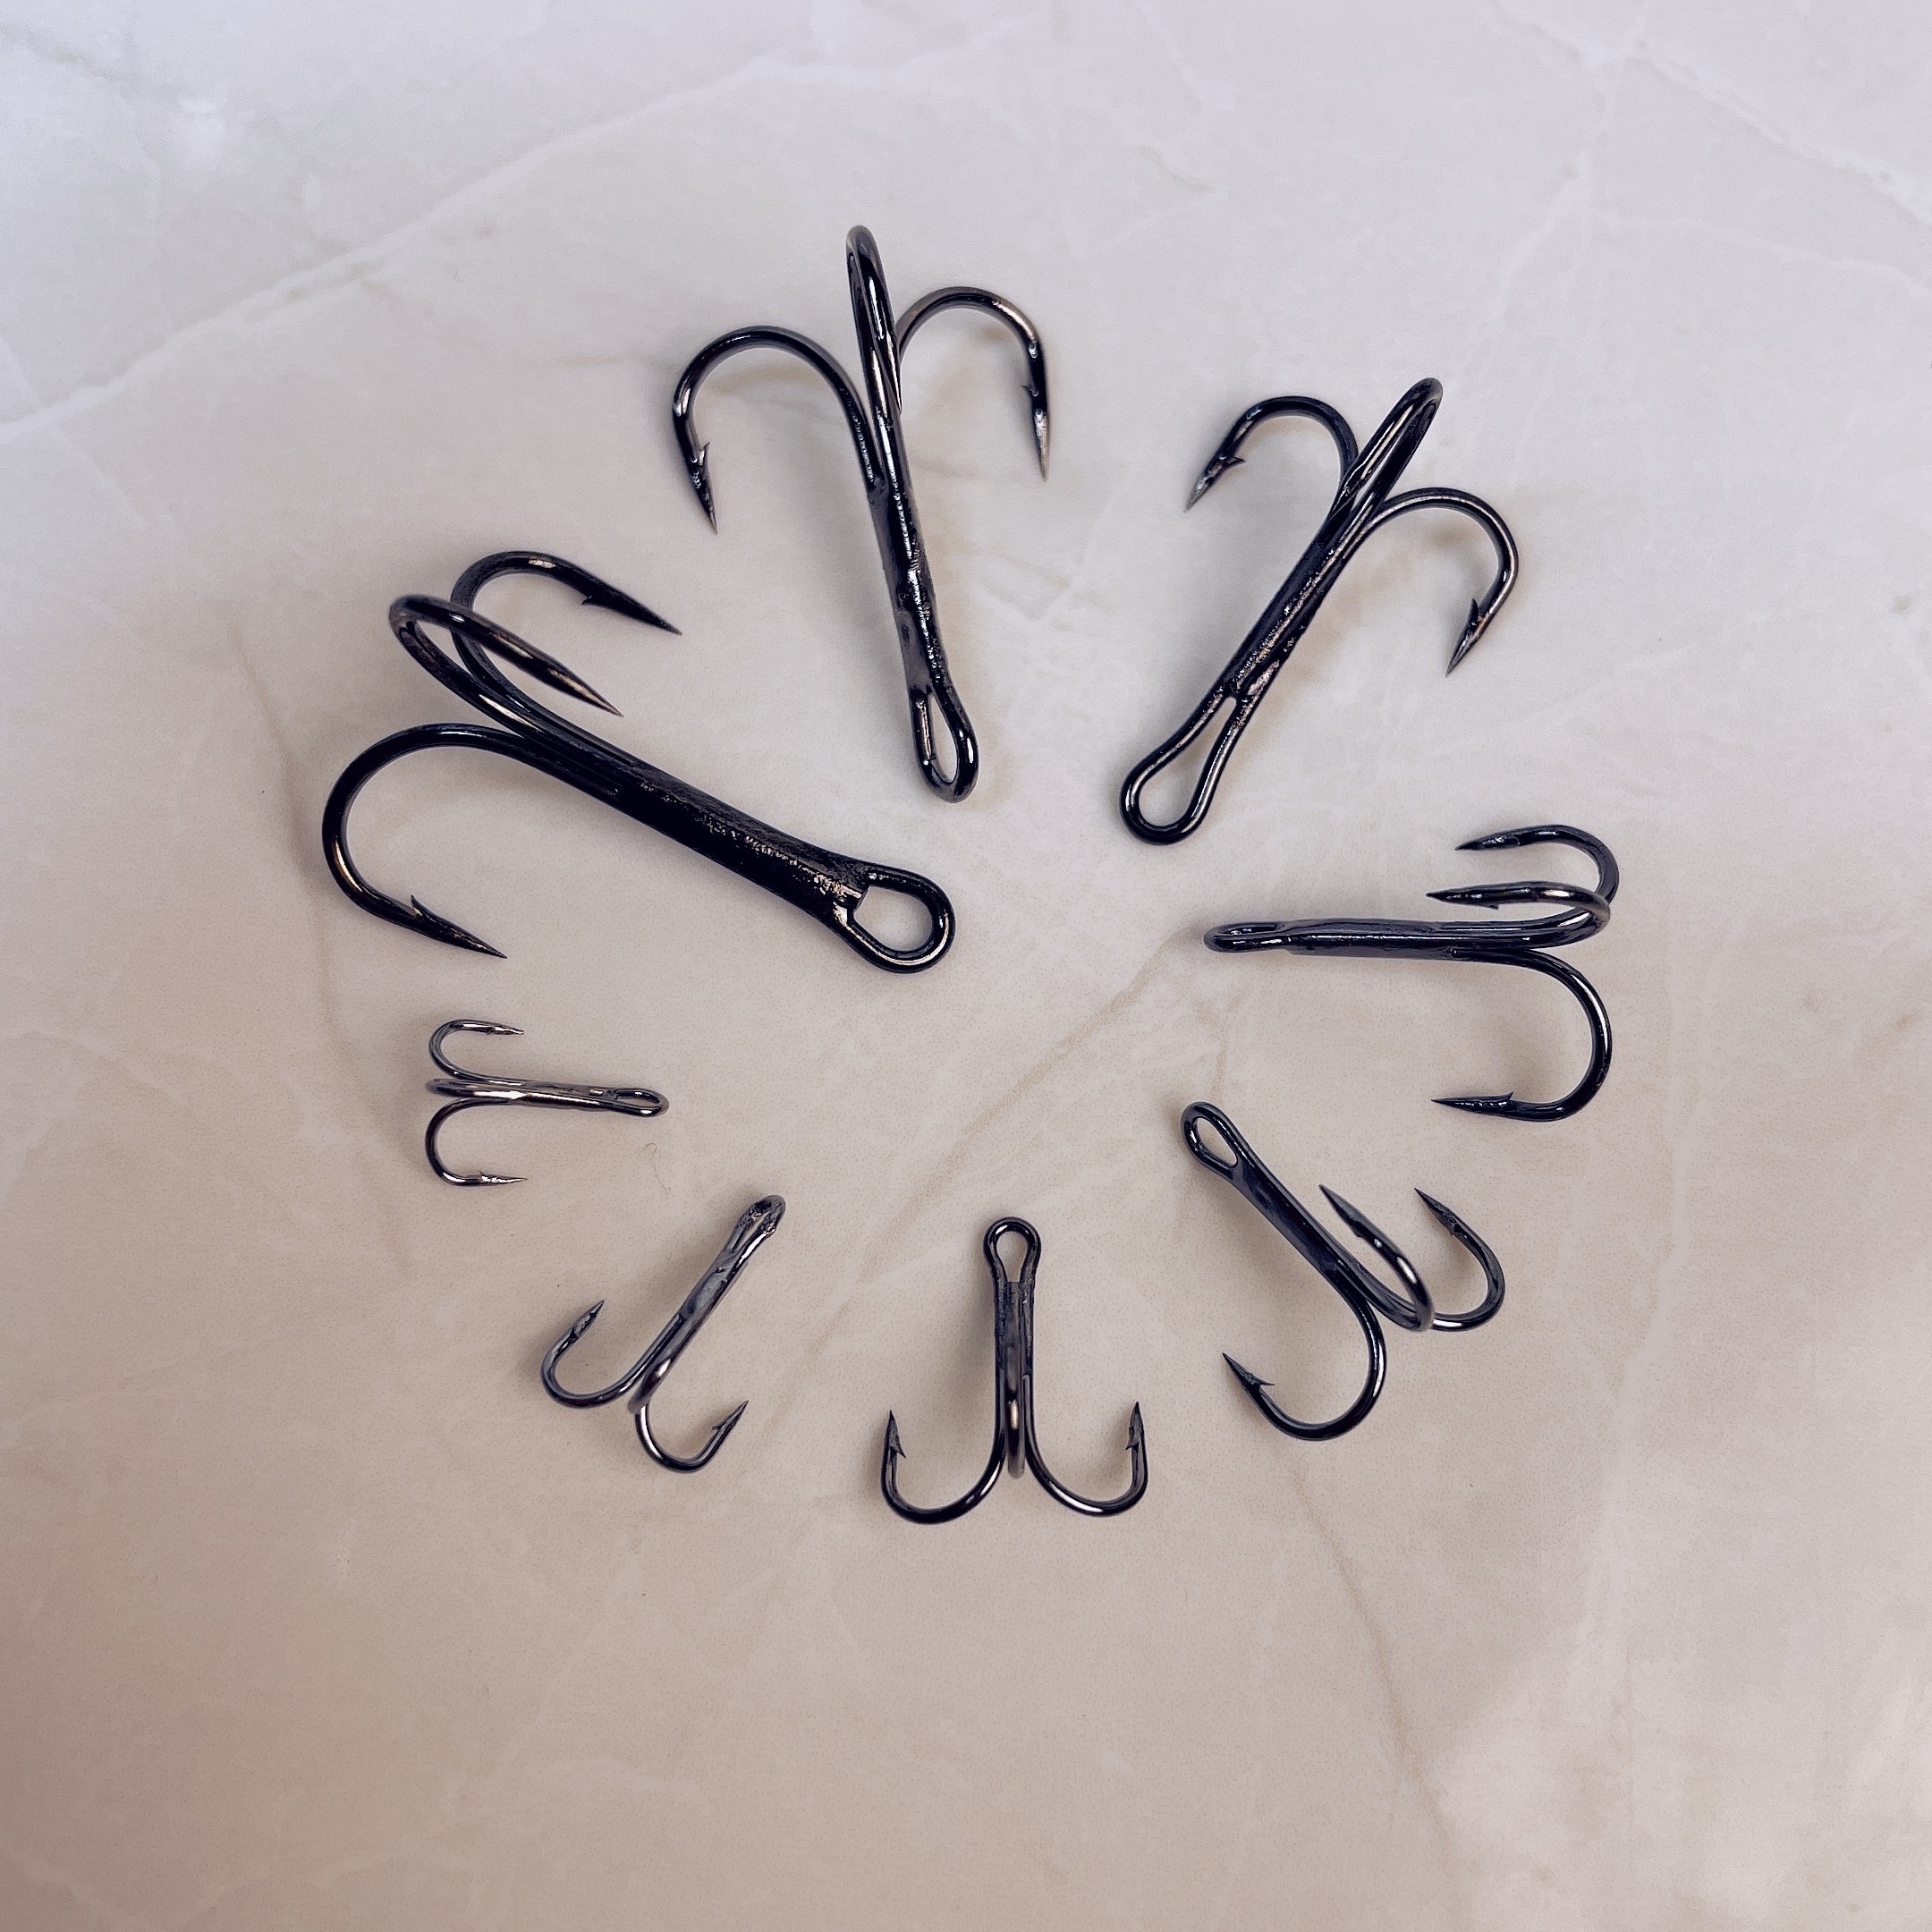 30pcs Barbed Fishing Hooks, Treble Hooks For Spear Fish, Outdoor Fishing  Tackle